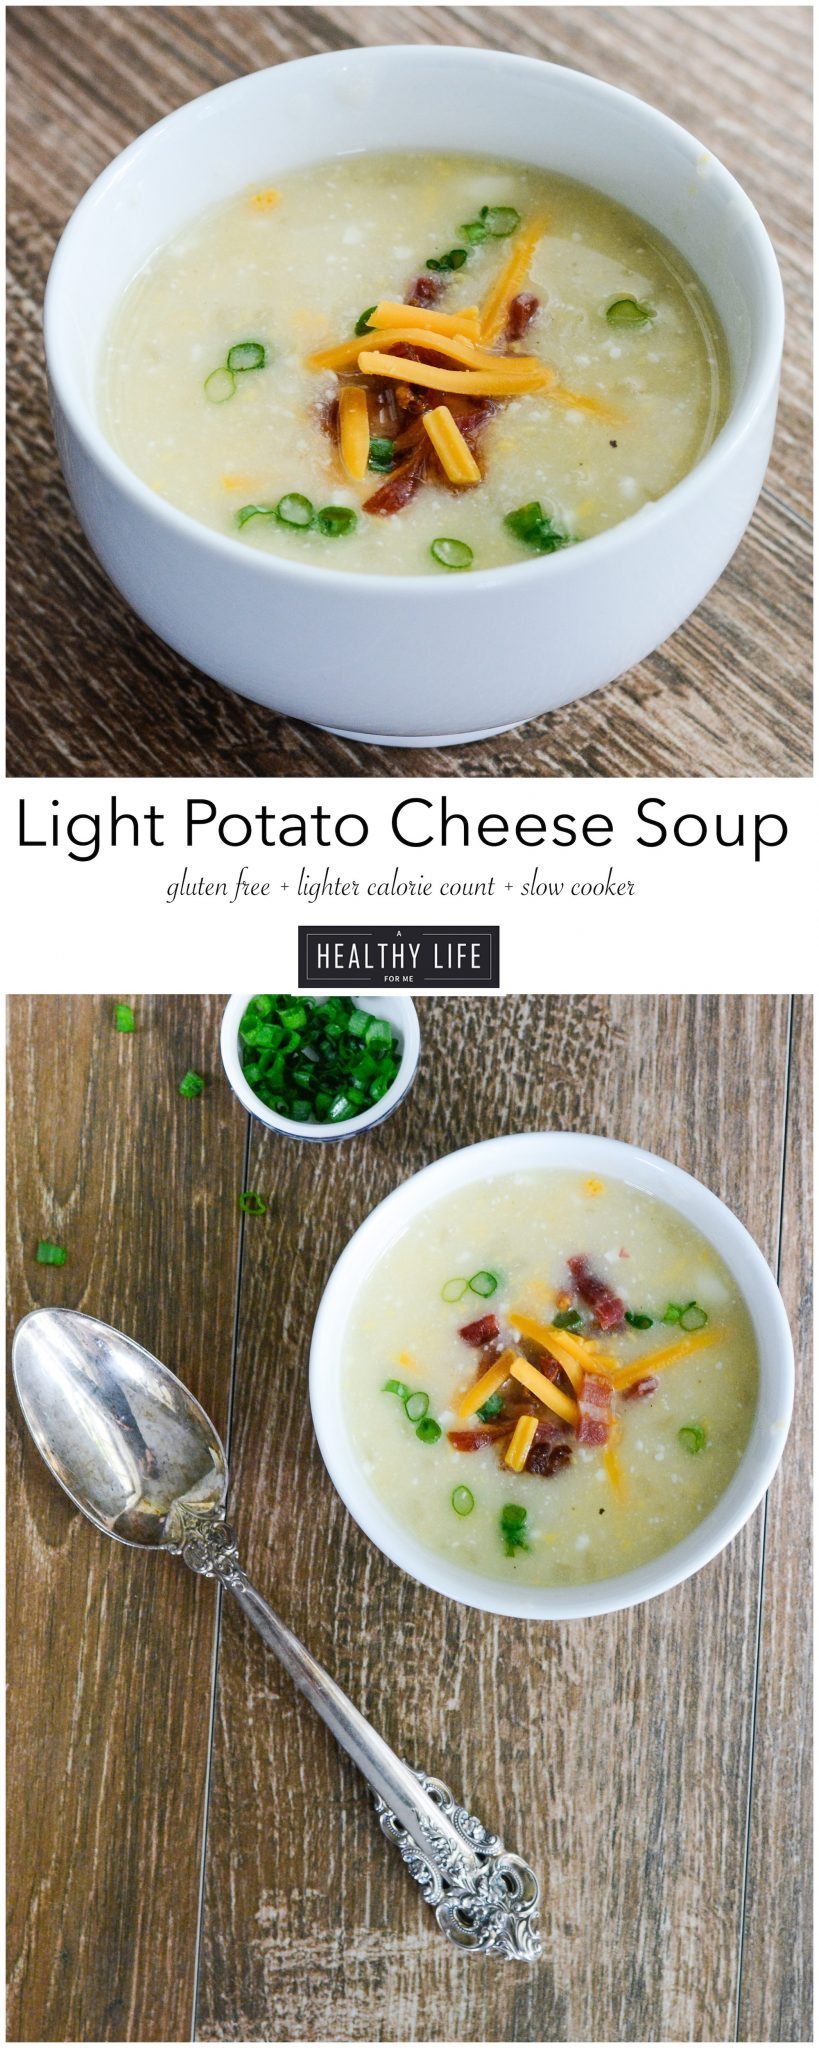 Light Potato Cheese Soup made in a slow cooker is delicious, simple and comforting | ahealthylifeforme.com